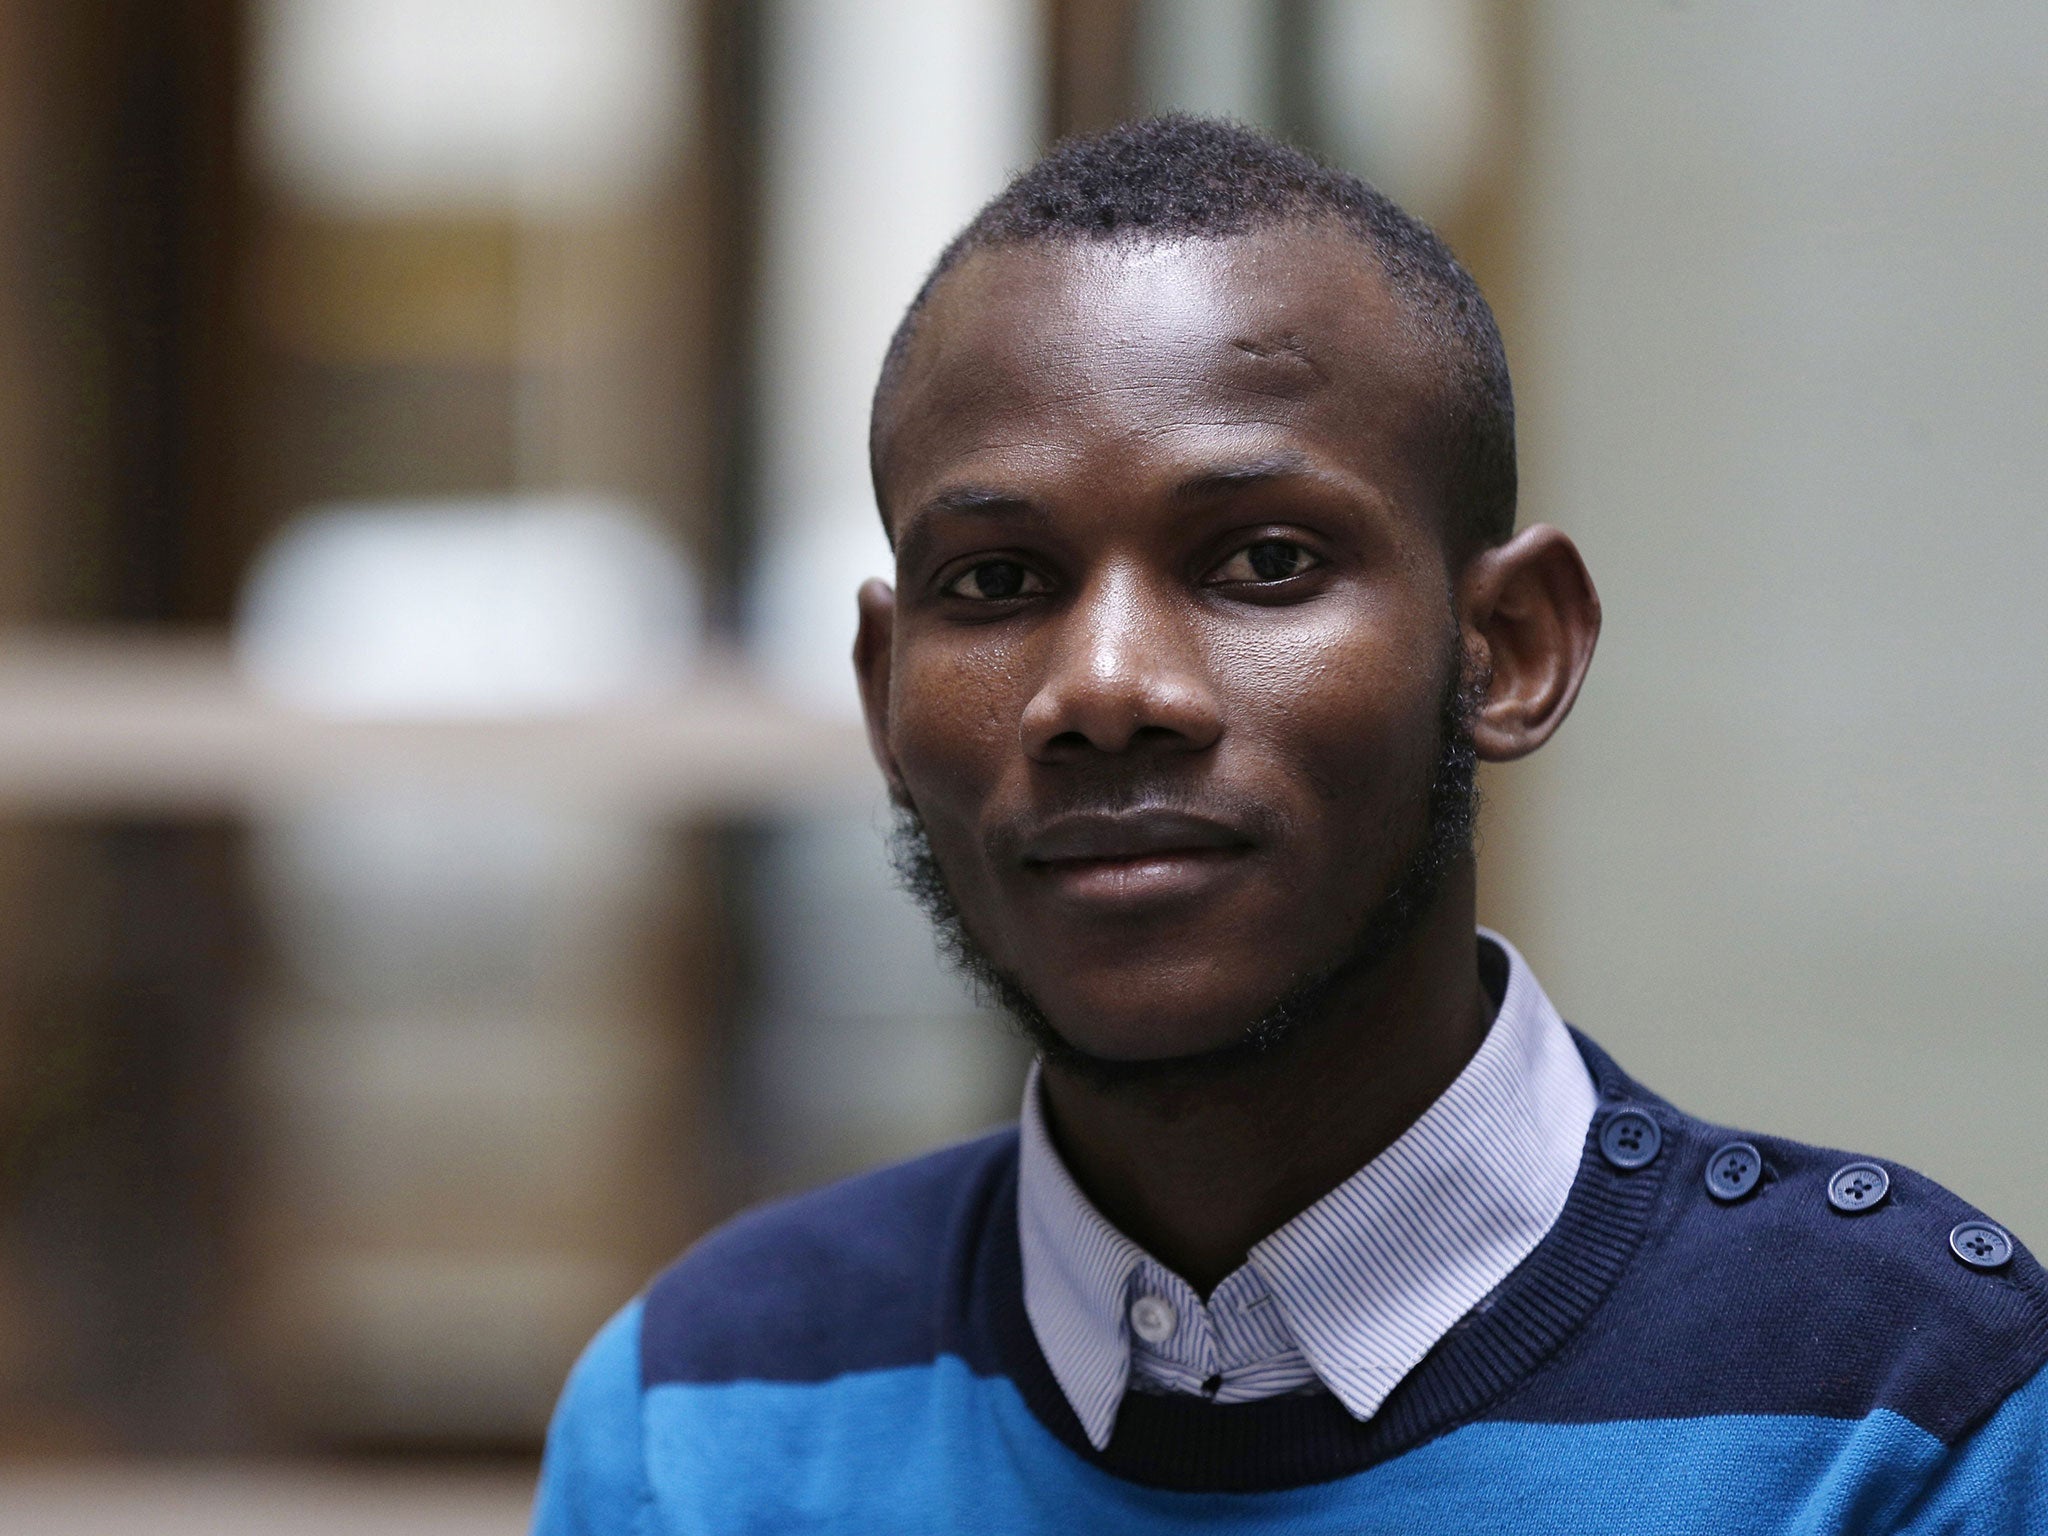 Lassana Bathily, a Malian Muslim employee who helped Jewish shoppers hide in a cold storage room during the Paris supermarket attack on 9 January